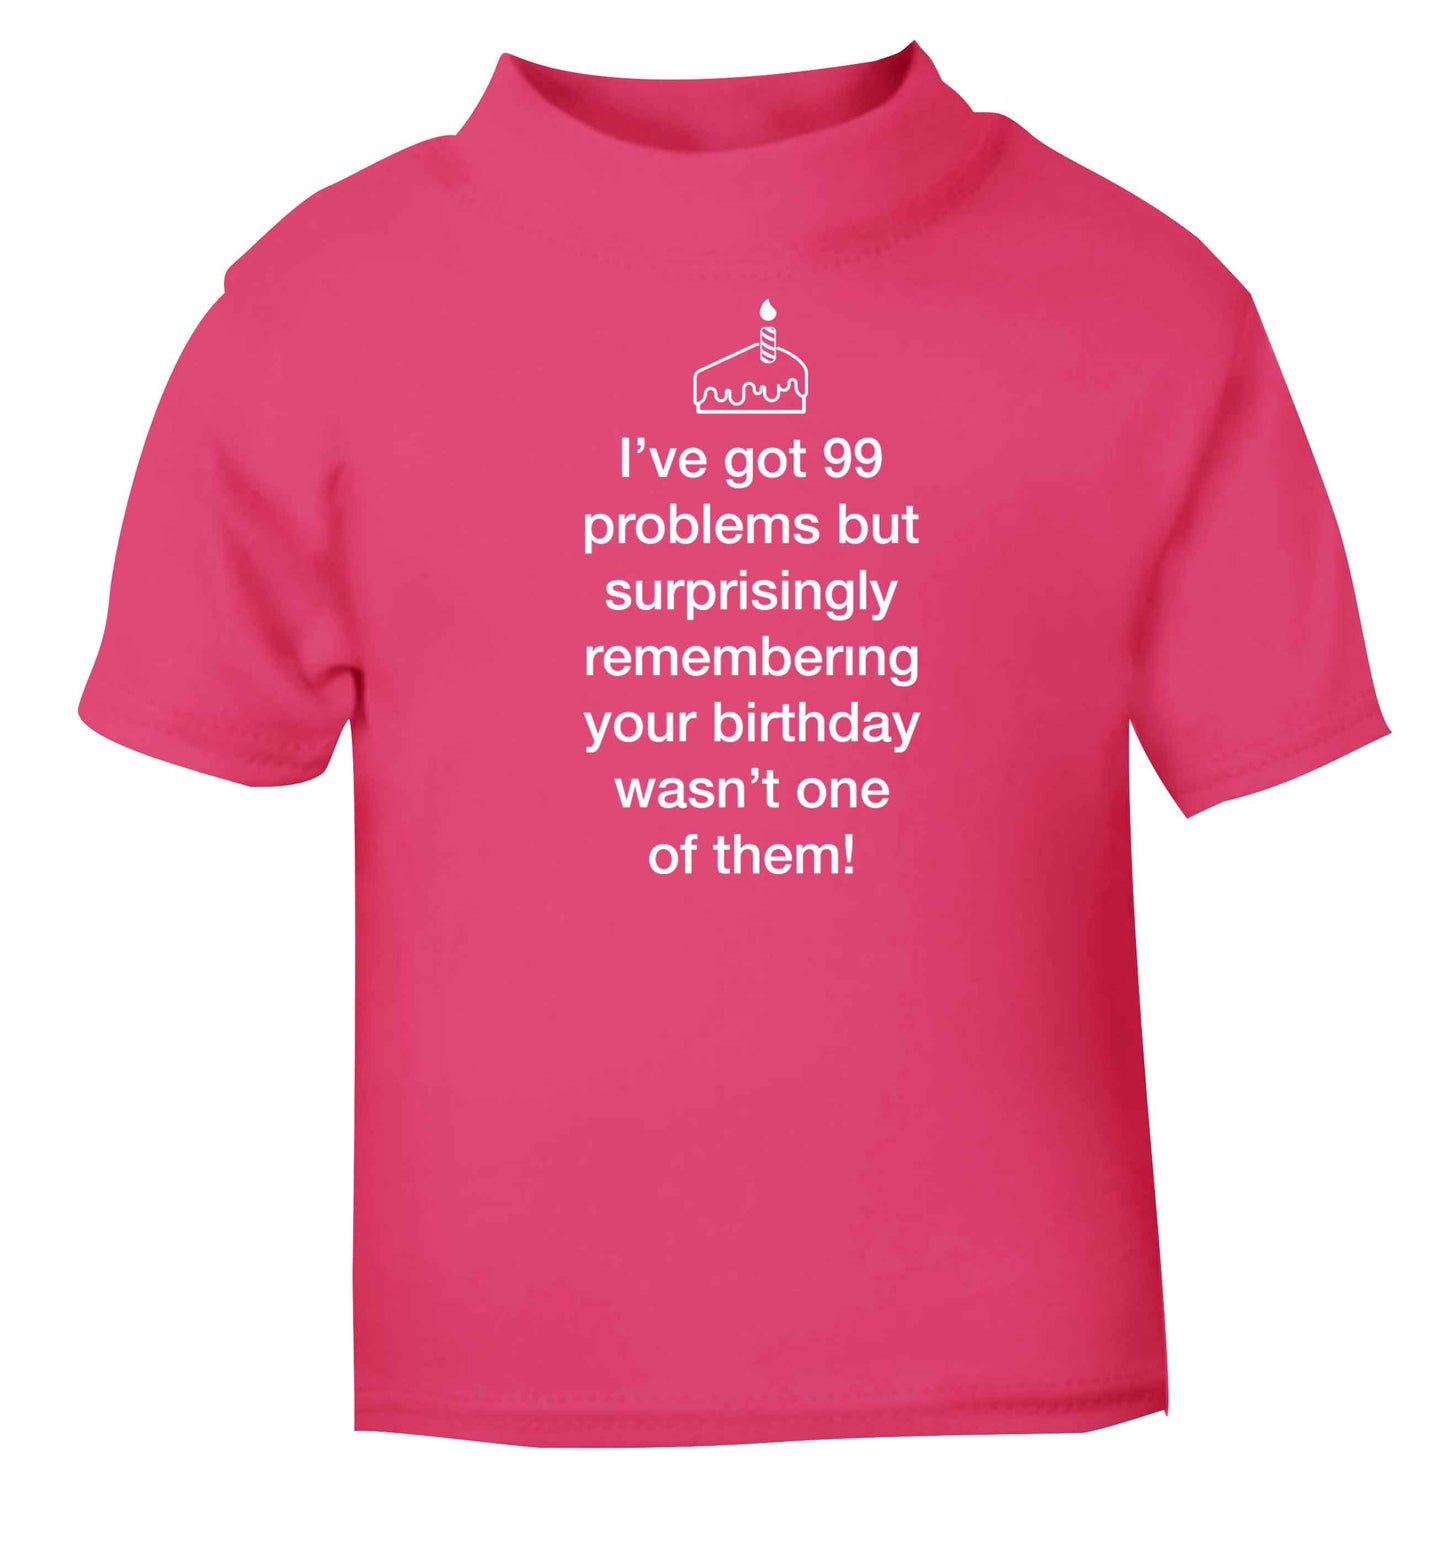 I've got 99 problems but surprisingly remembering your birthday wasn't one of them! pink baby toddler Tshirt 2 Years